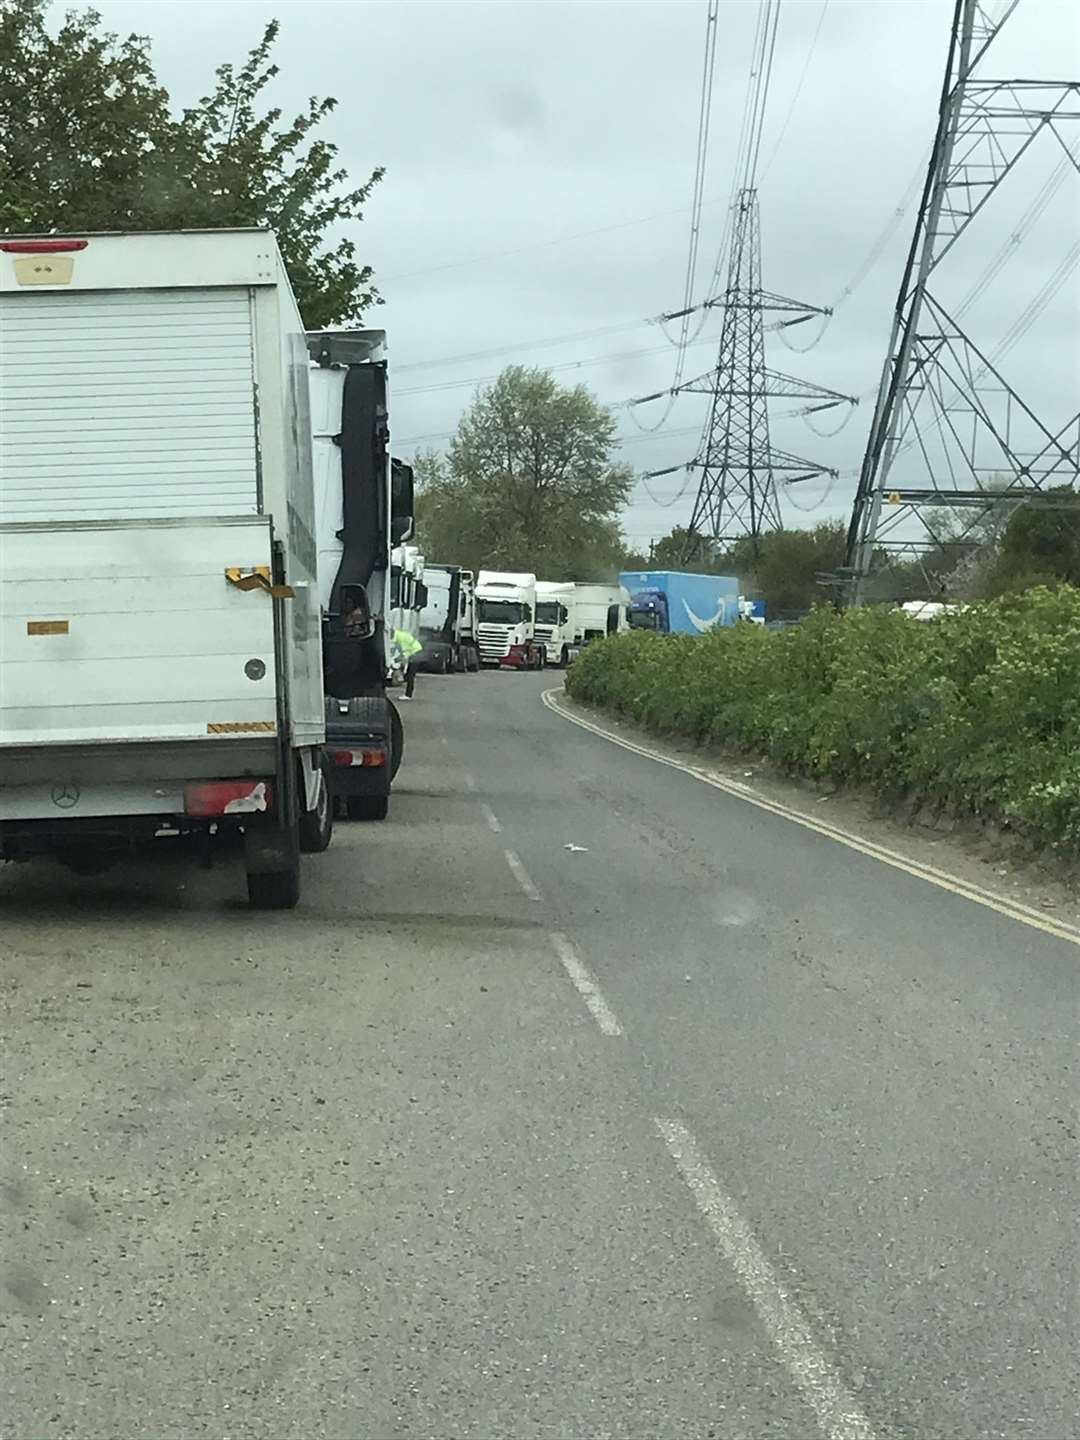 Up to 20 lorries have been seen blocking part of the roads in Hoo, near Rochester